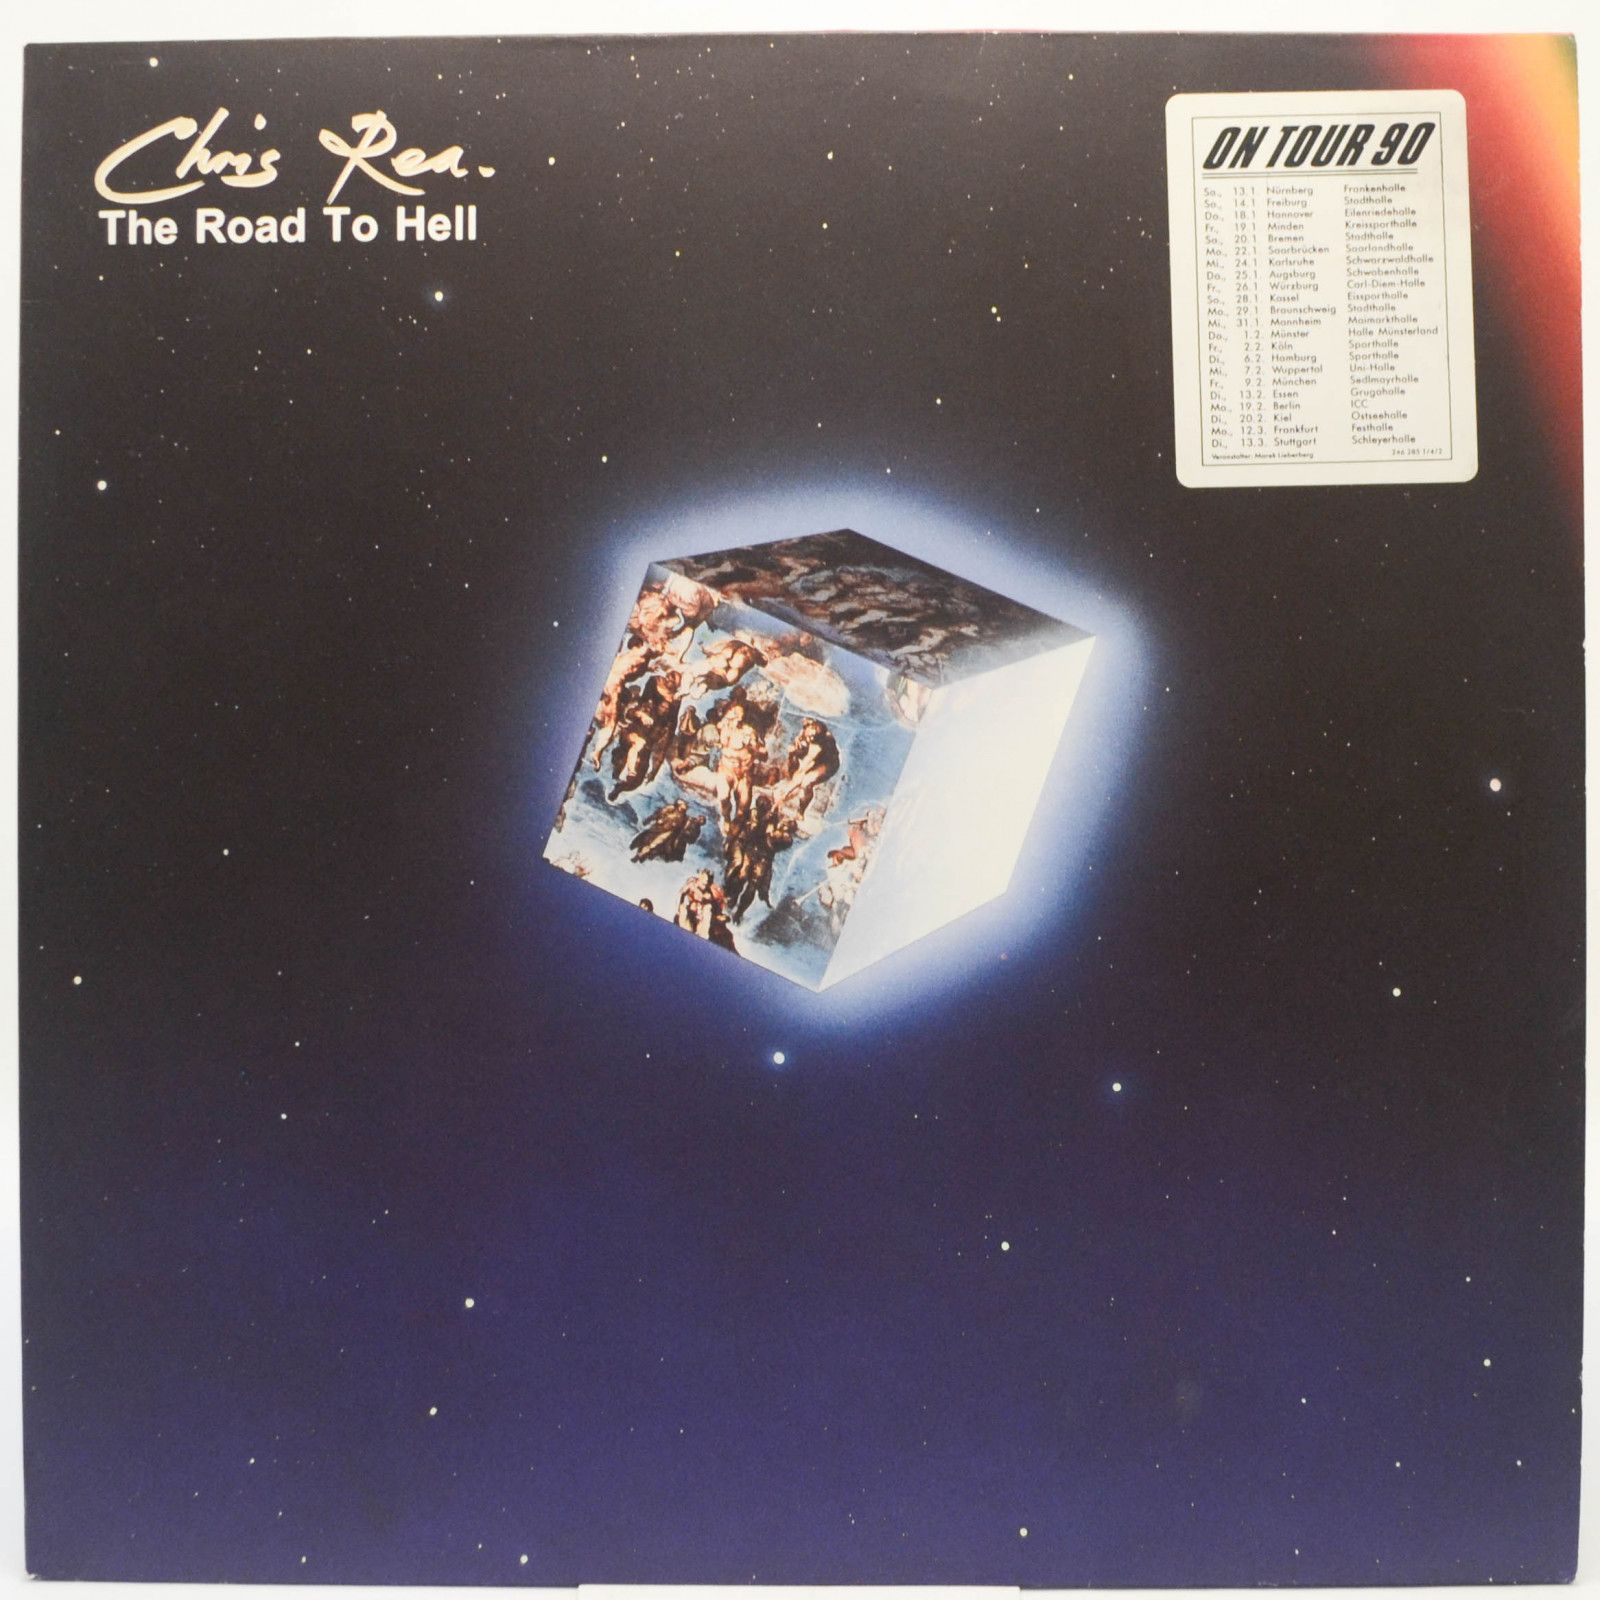 Chris Rea — The Road To Hell, 1989